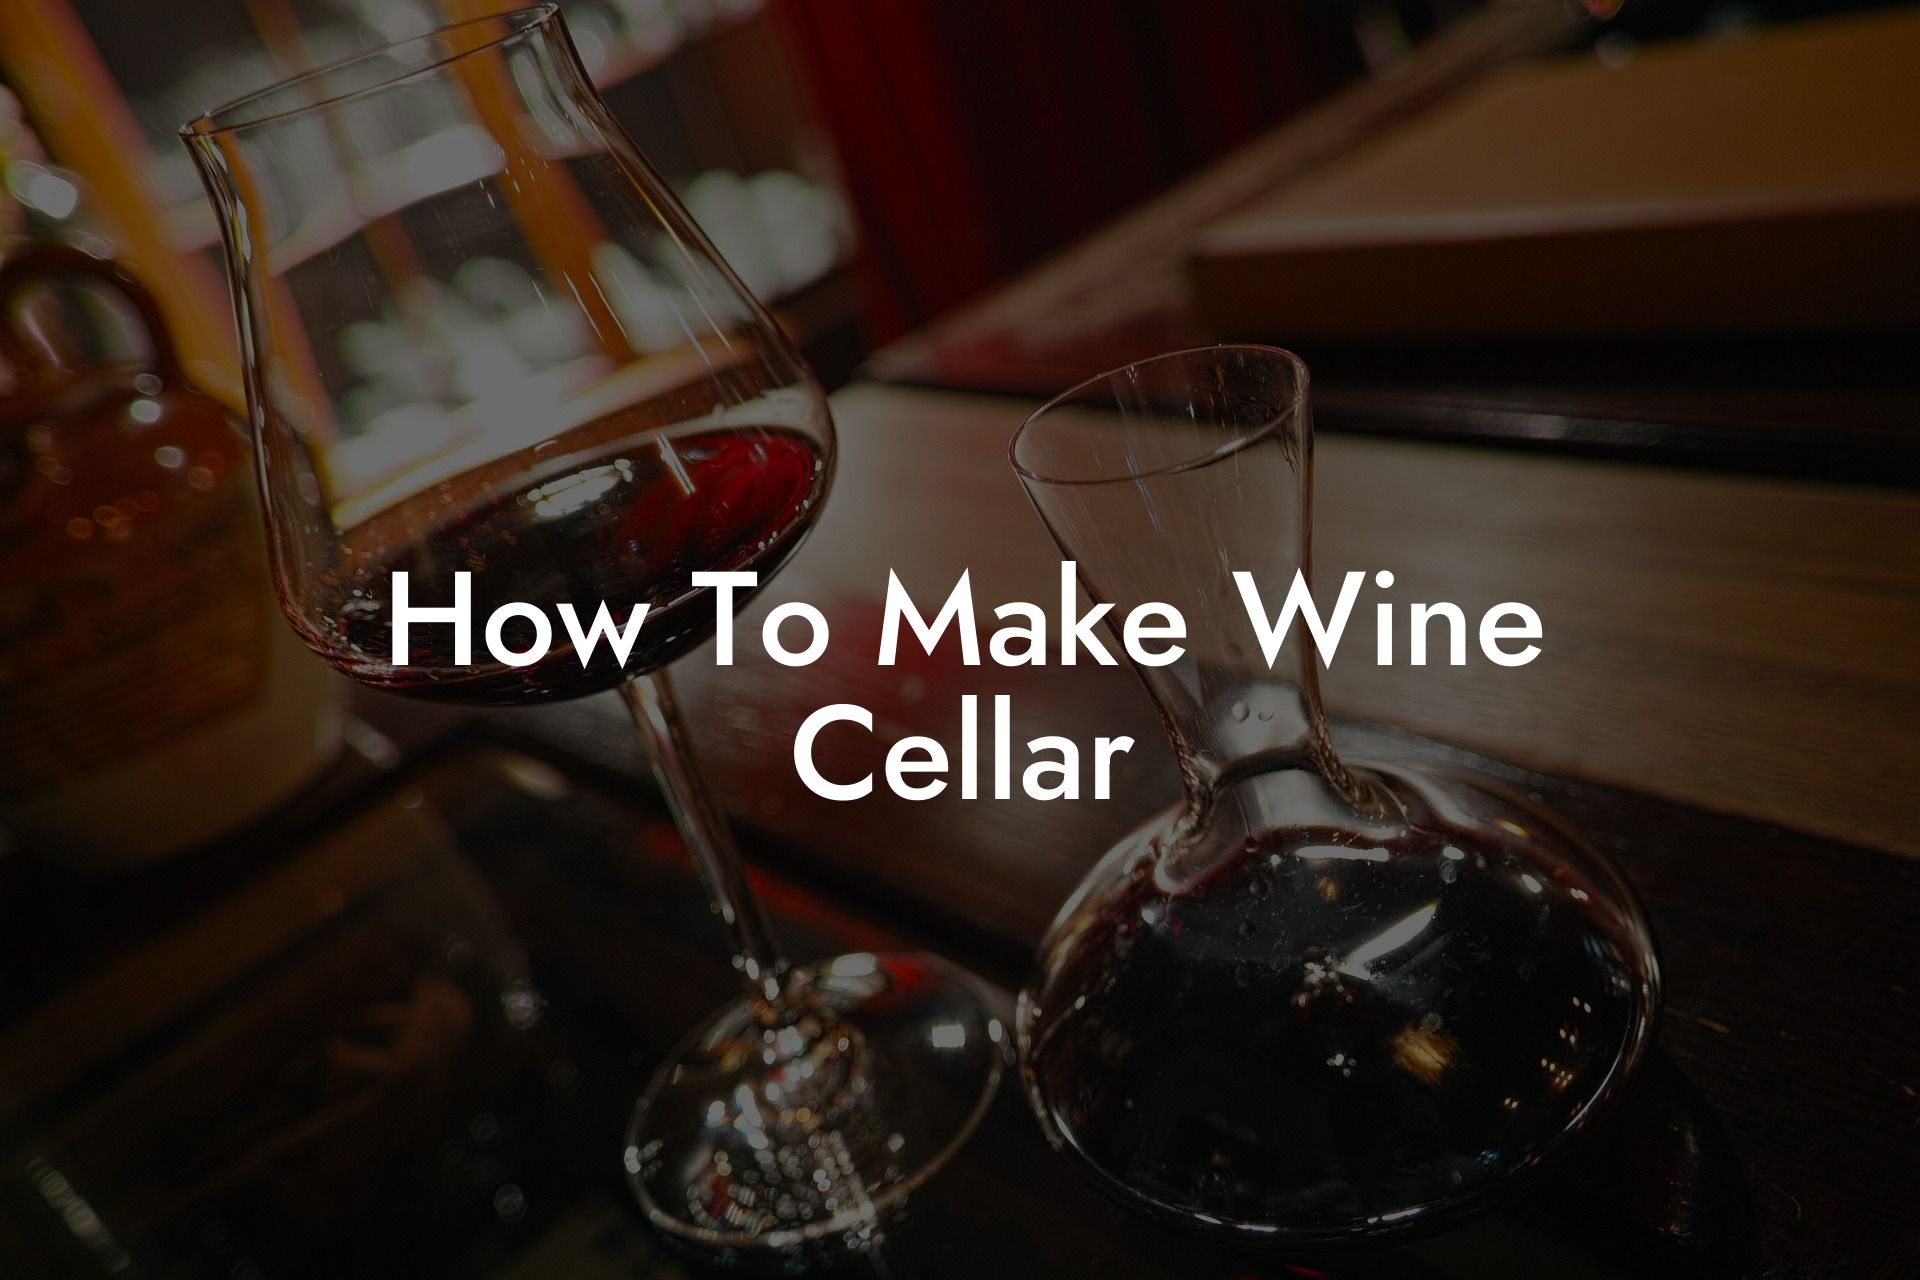 How To Make Wine Cellar